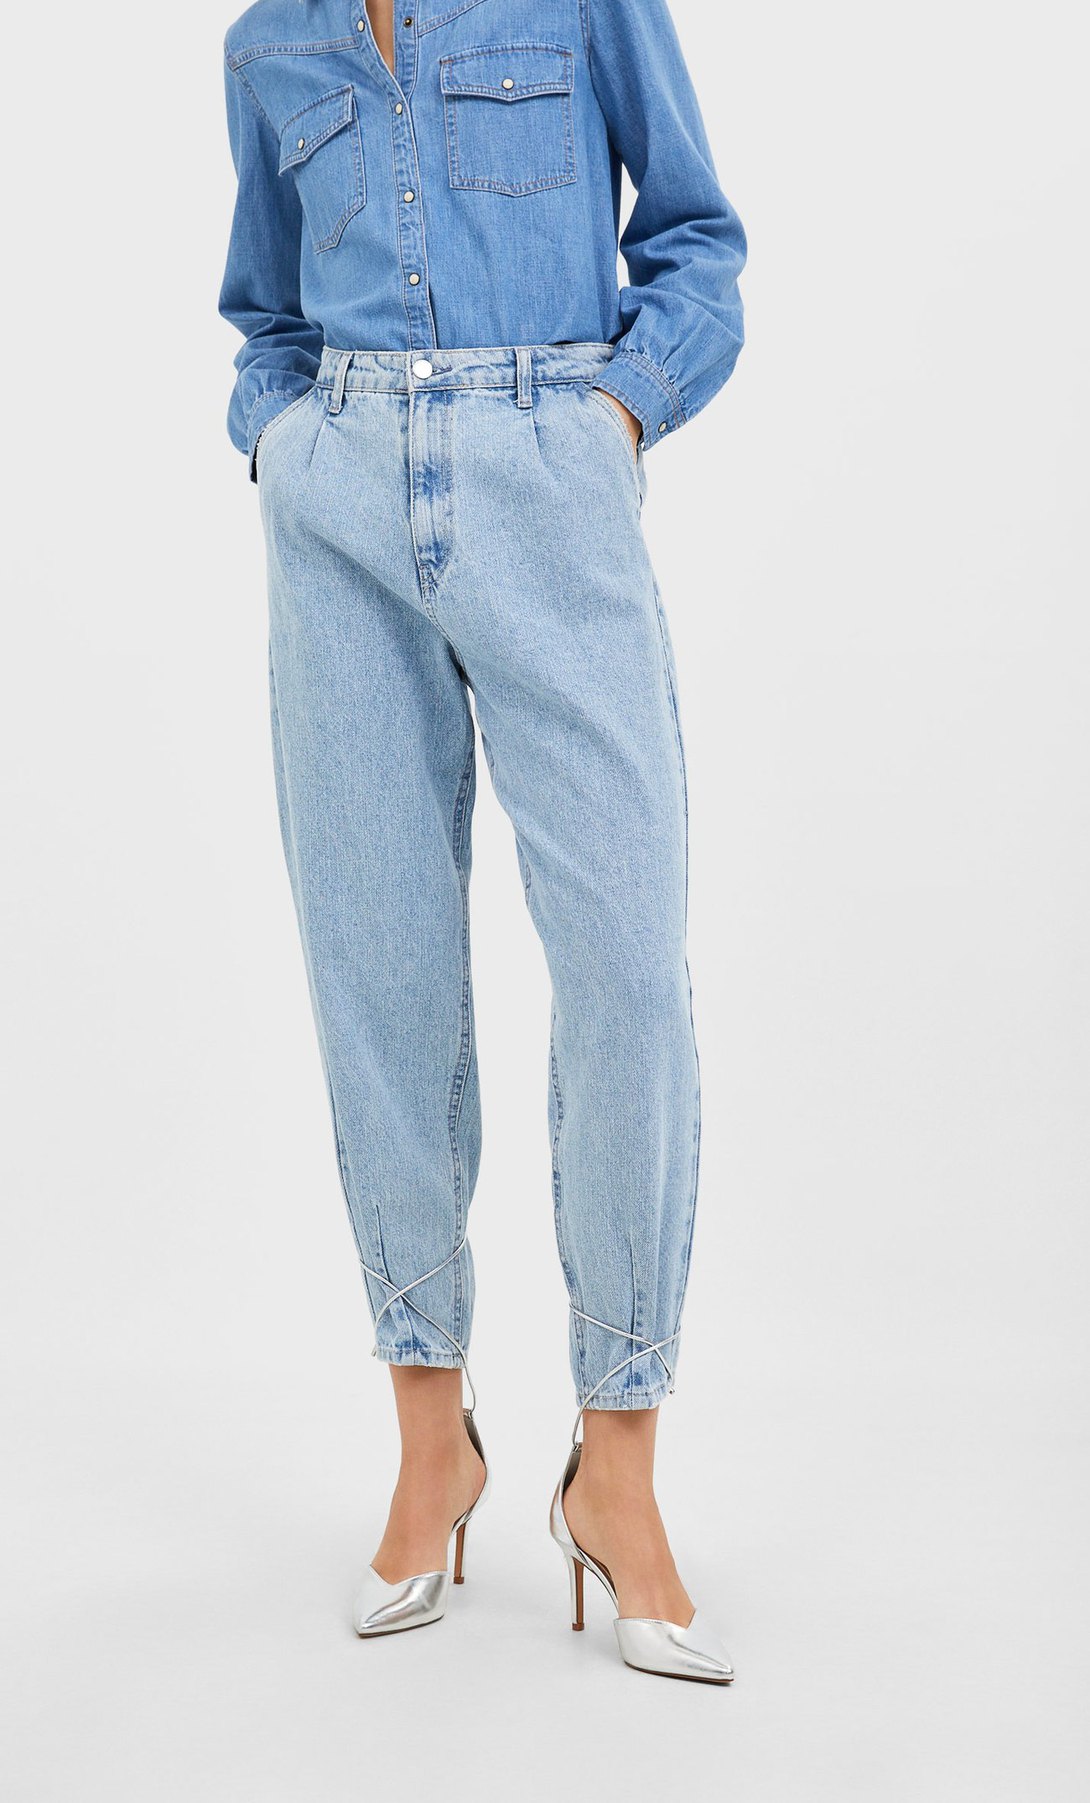 We have found the jeans of our dreams in Stradivarius for only €30 | Her.ie